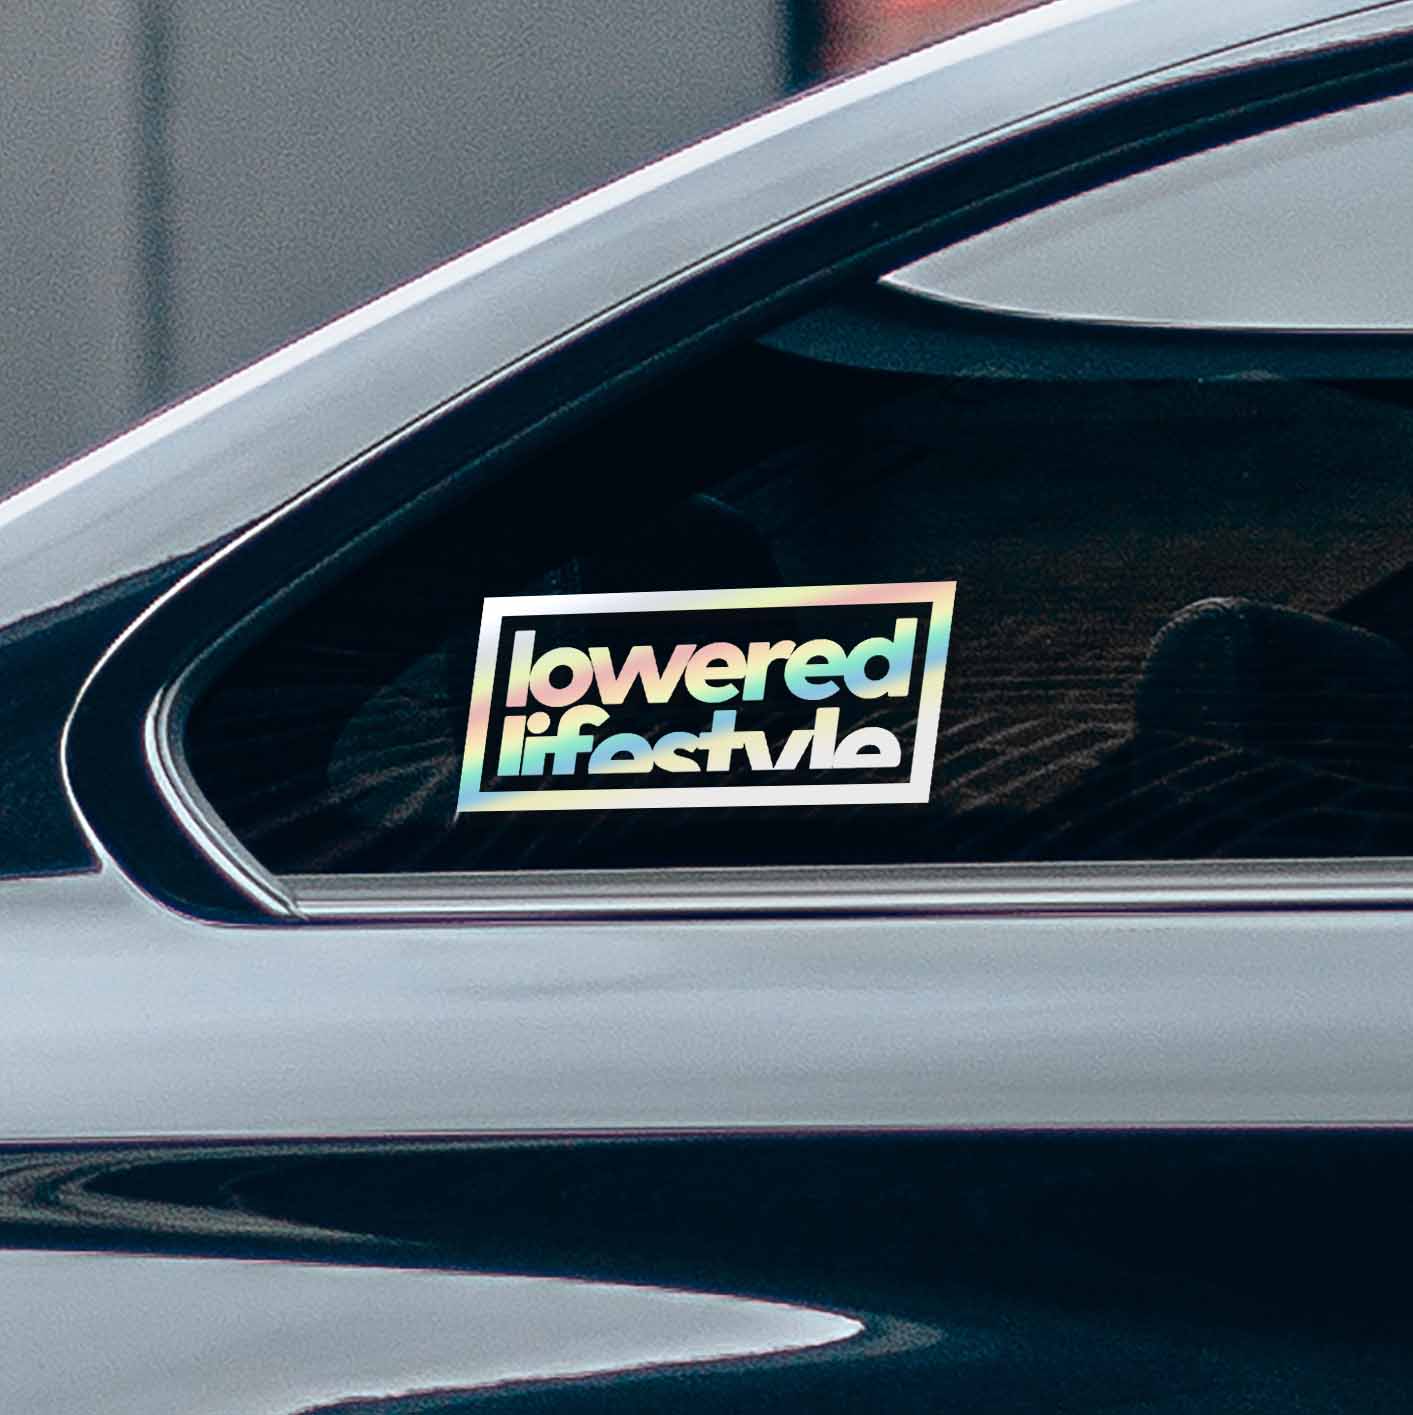 Lowered Lifestyle sticker for stanced or slammed vehicles. Will look great on any lowered car, truck or modified vehicle. Can be placed either on a window or on the vehicle body.